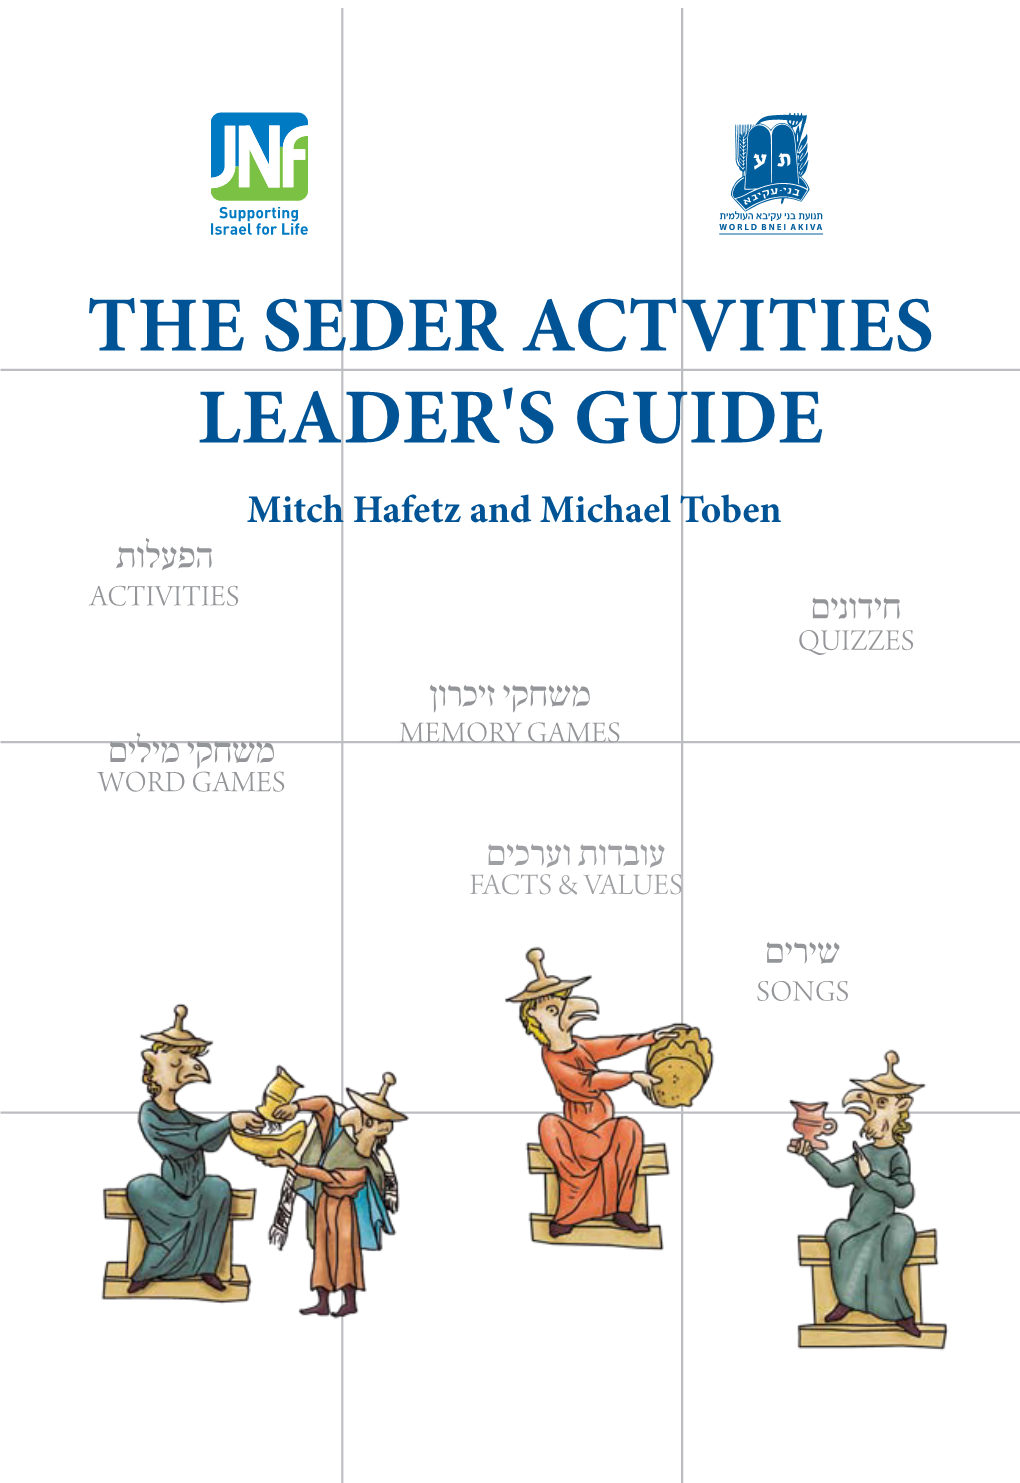 The Seder Actvities Leader's Guide